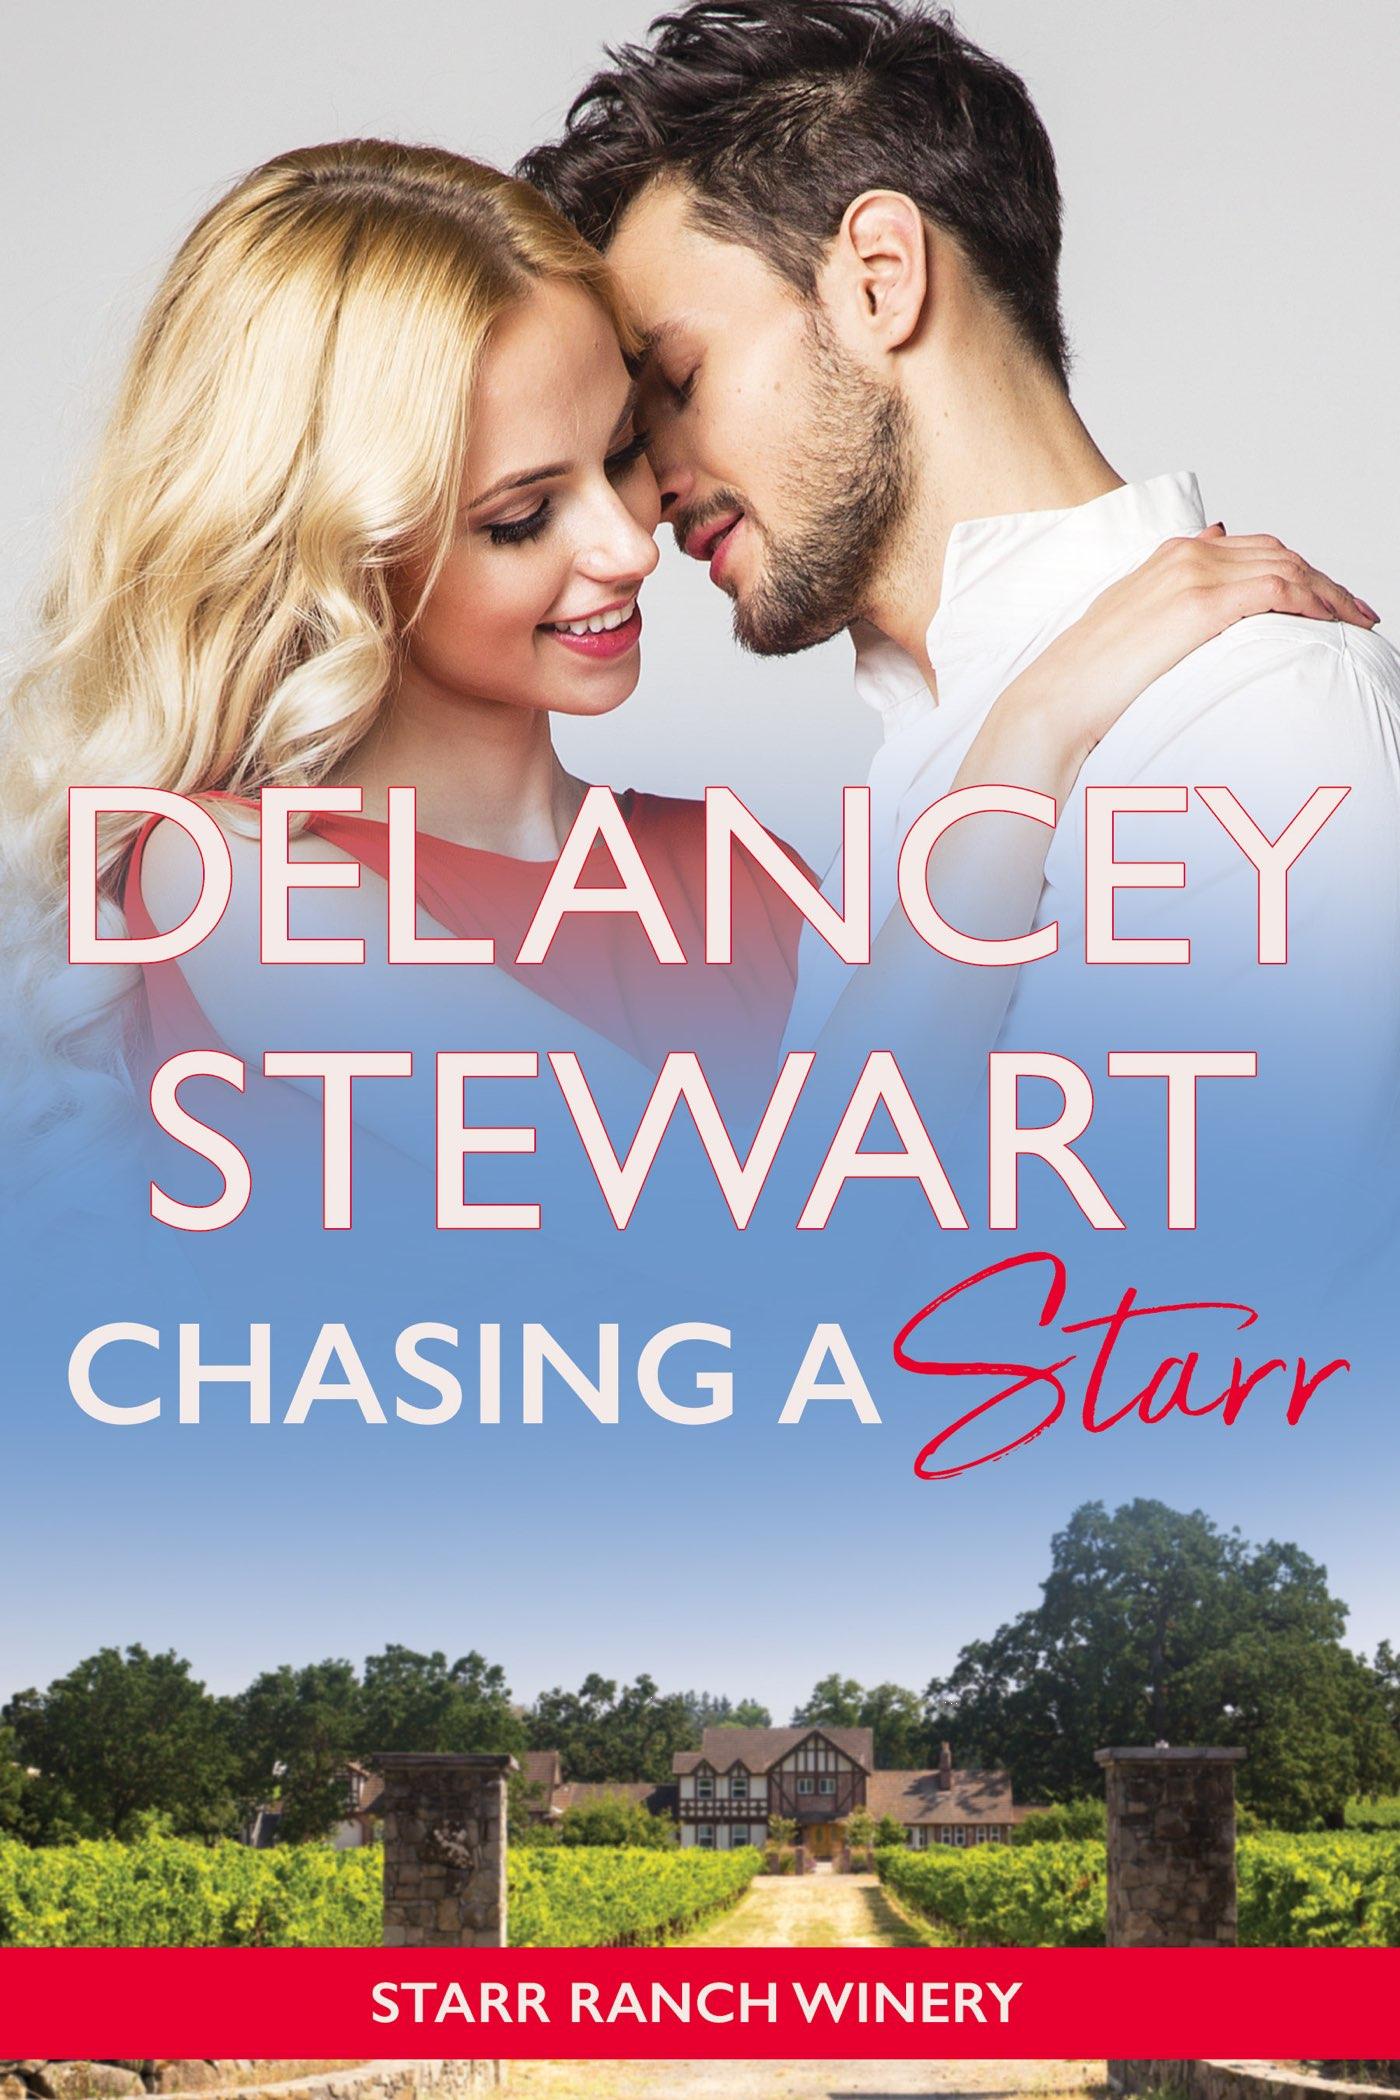 Get your free copy of Chasing a Starr by Delancey Stewart | Booksprout